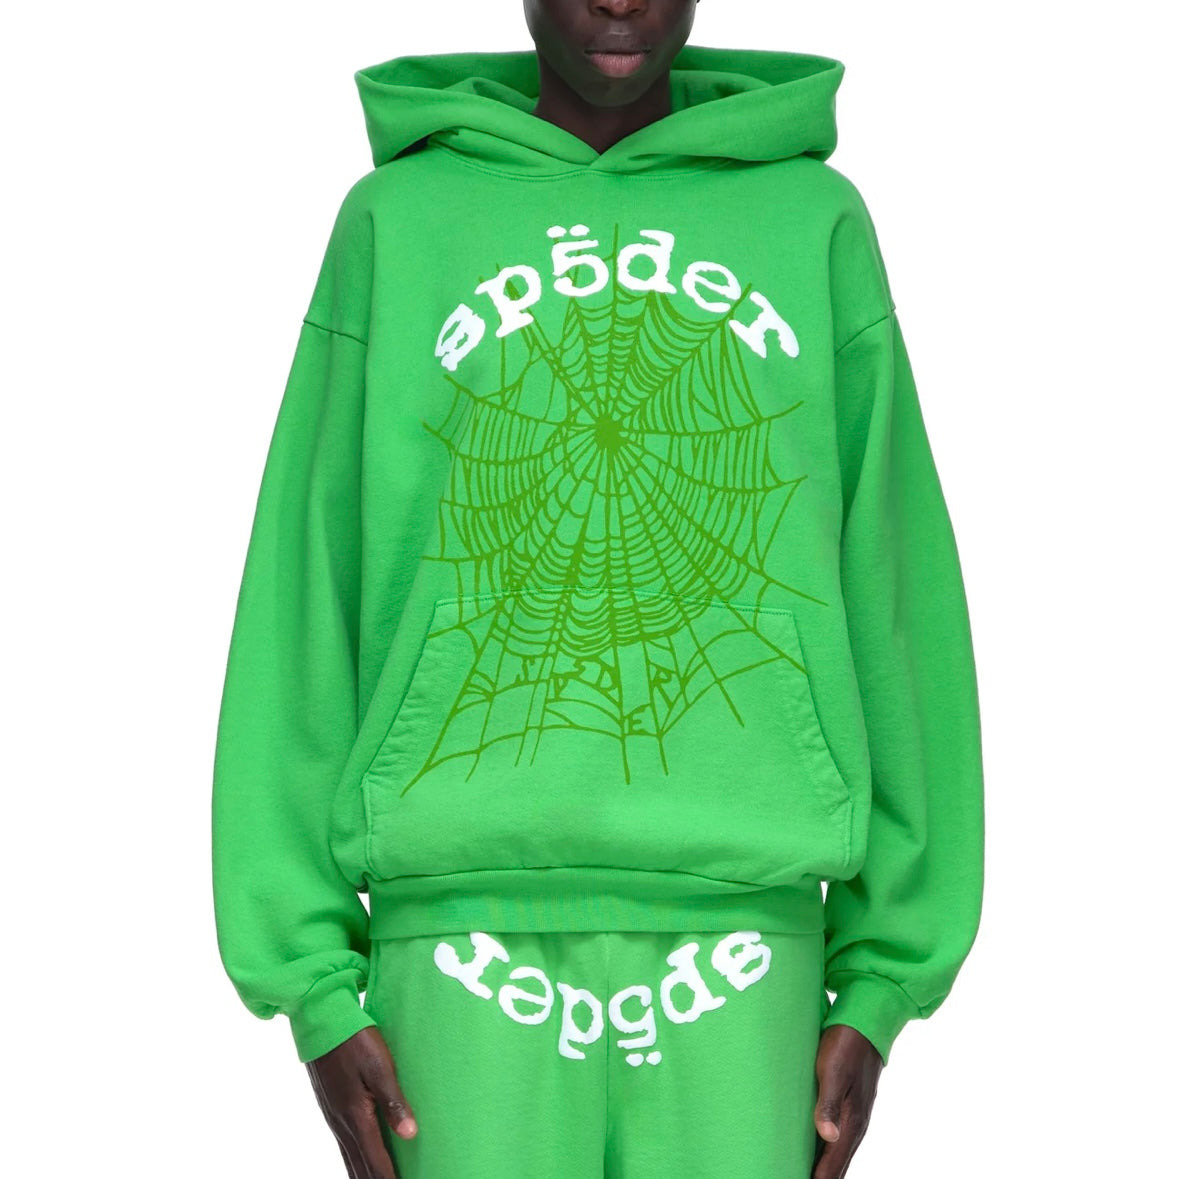 Sp5der Green White Legacy Hoodie On Body Front Male